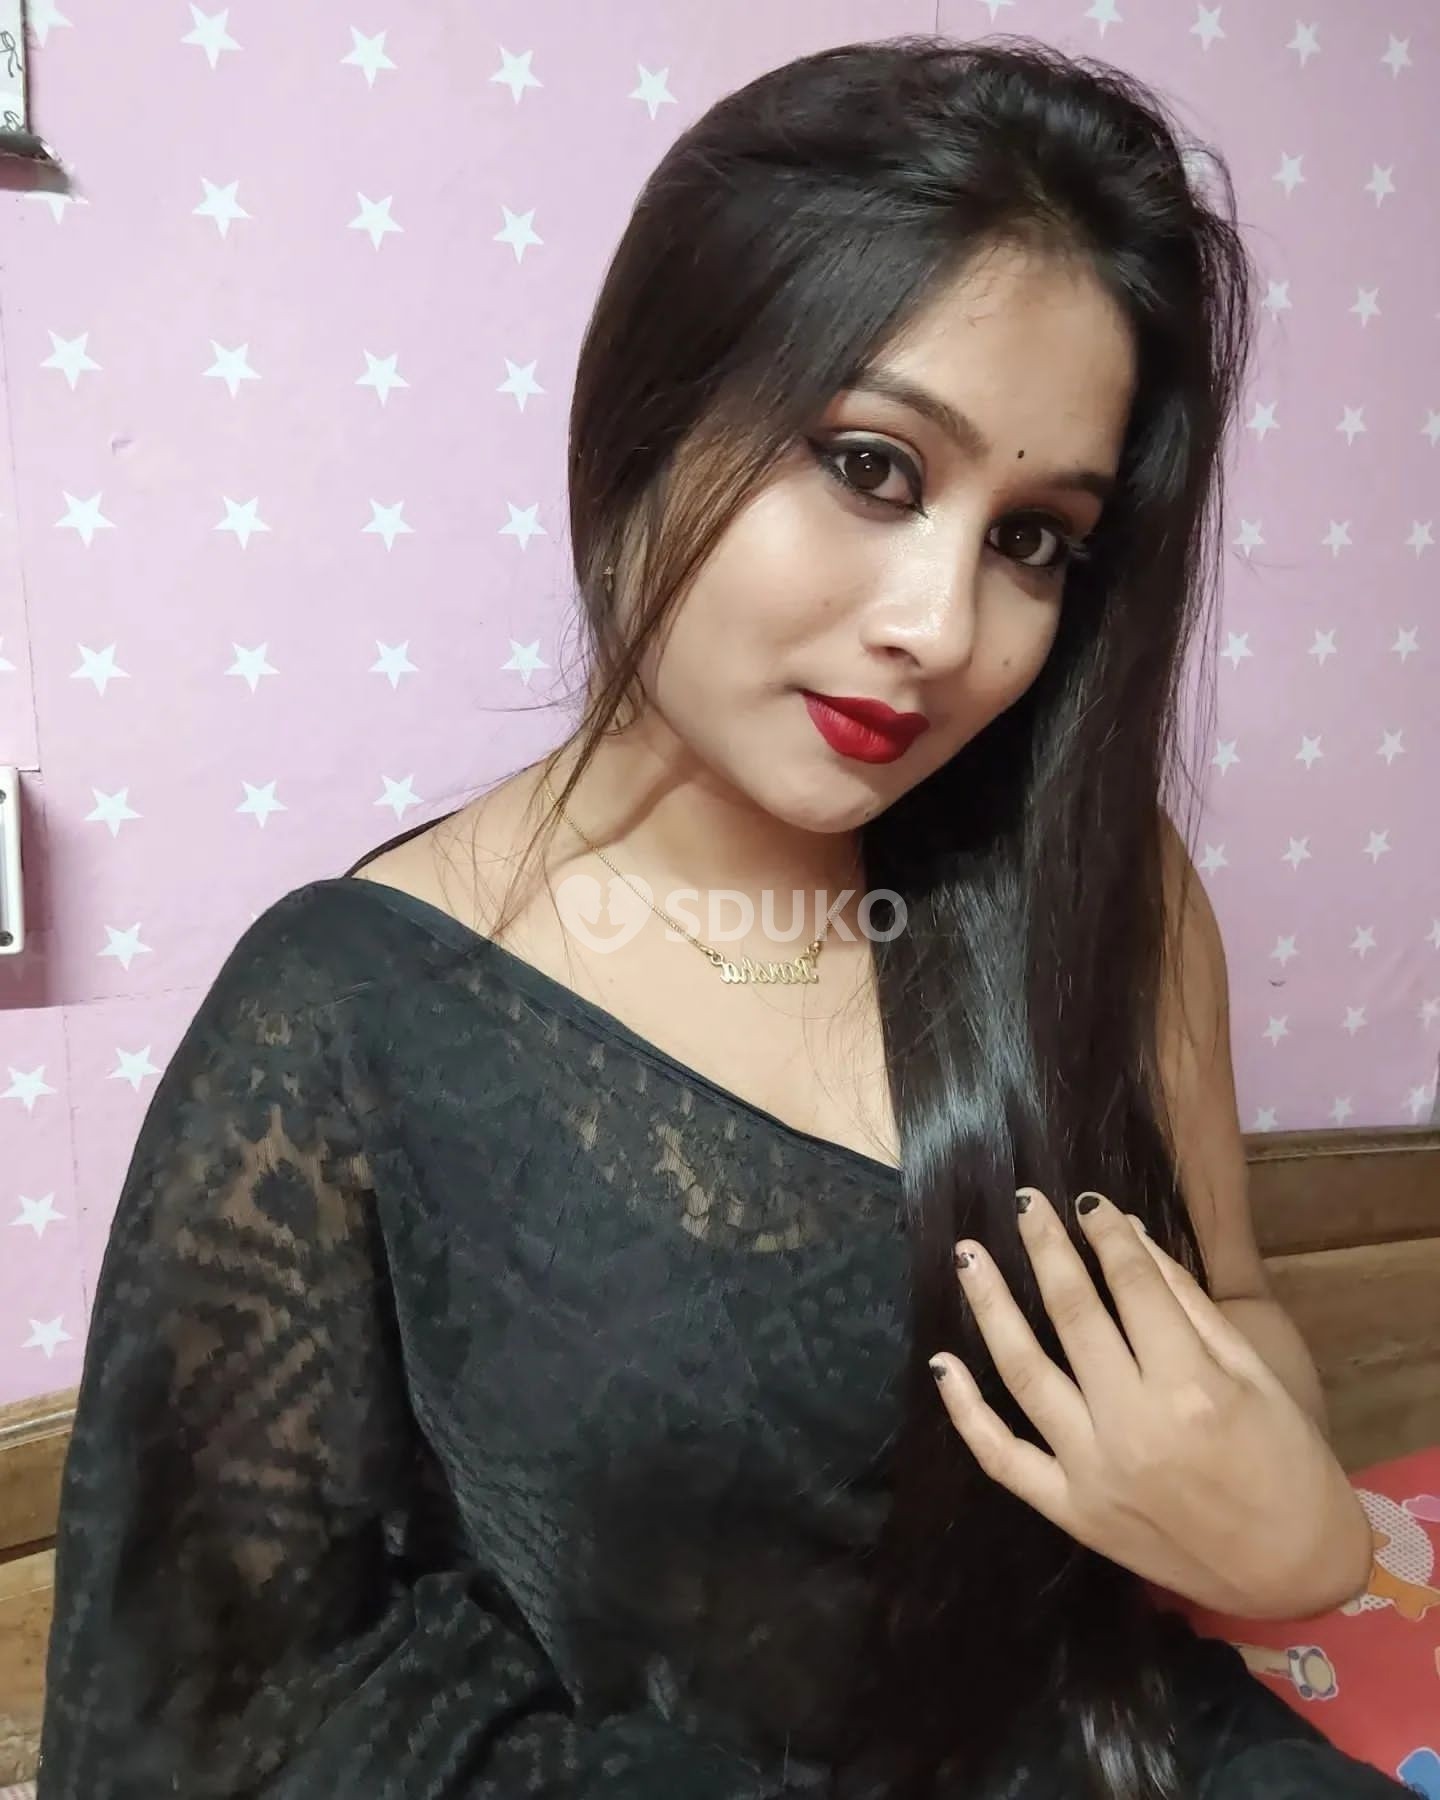 Ranchi.. 🆑 TODAY LOW PRICE 100% SAFE AND SECURE GENUINE CALL GIRL AFFORDABLE PRICE CALL NOW 24/7 AVAILABLE